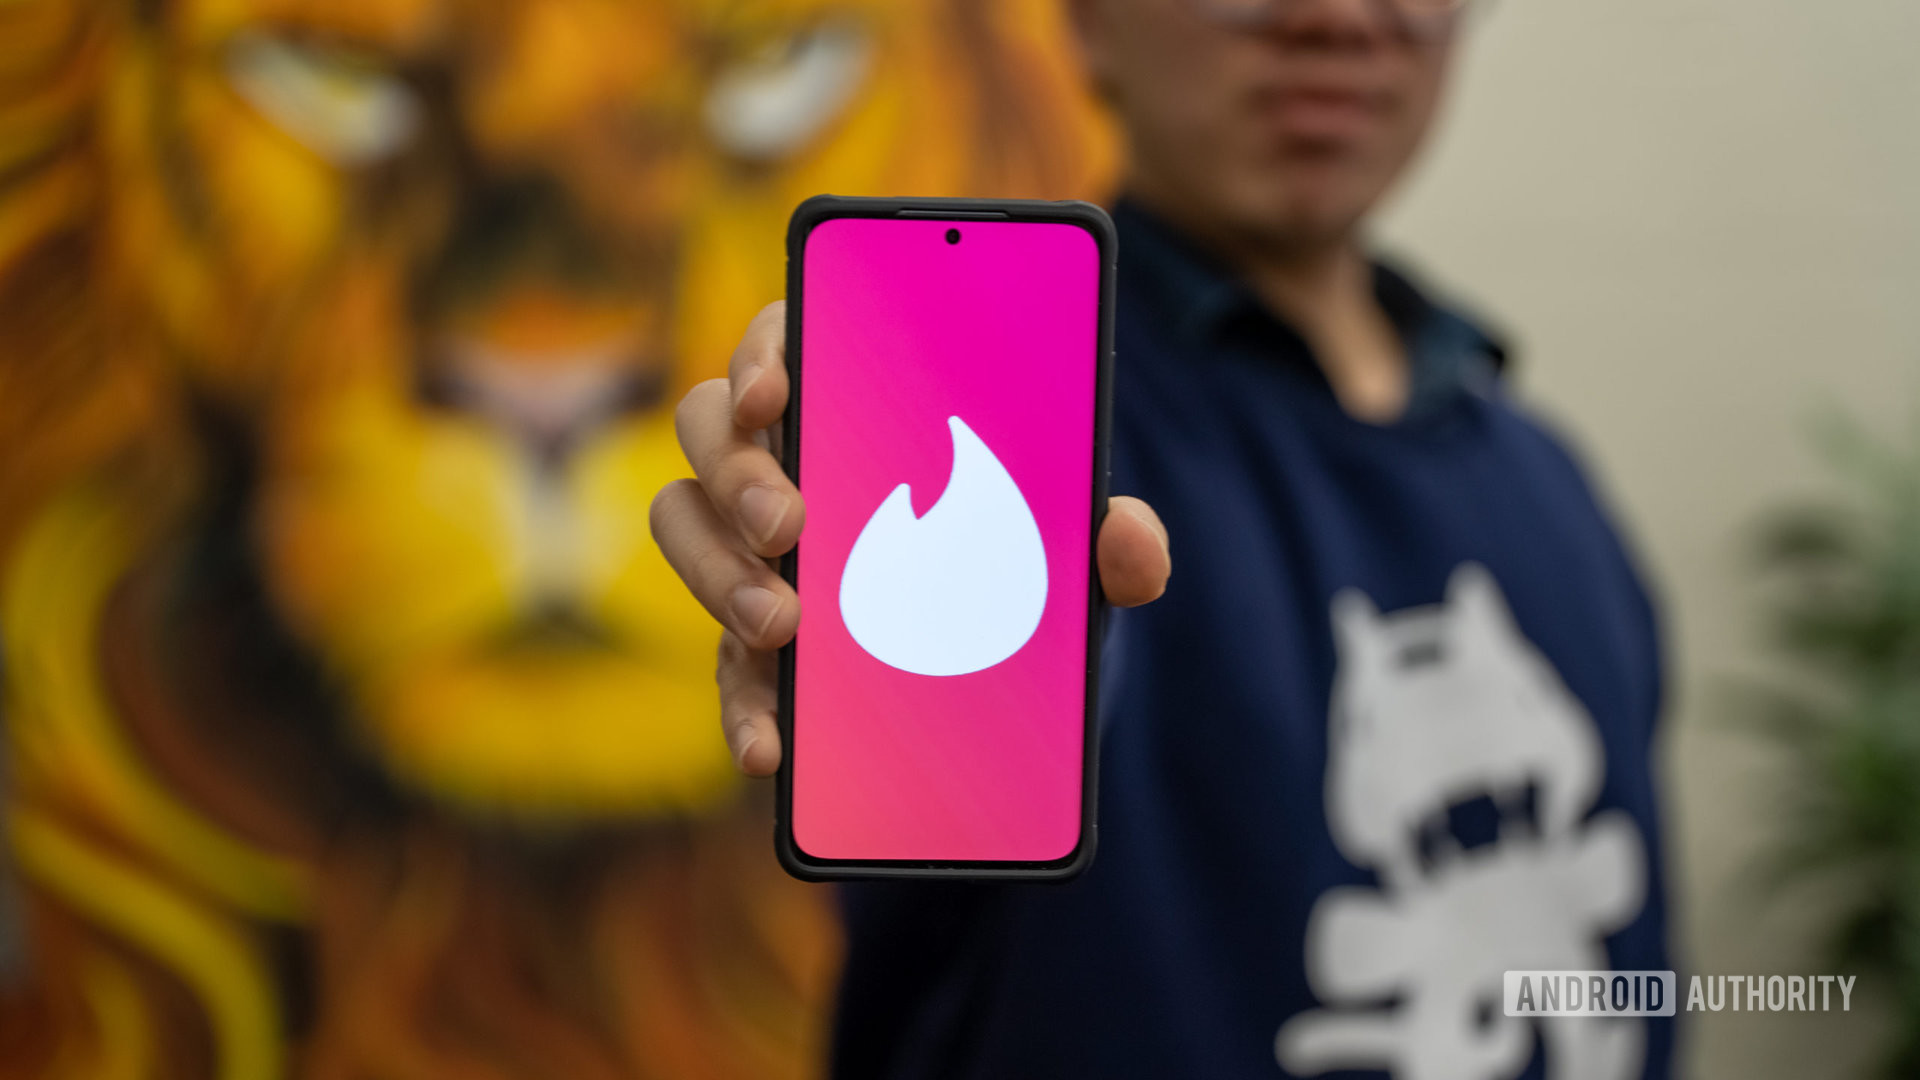 Tinder stock photo hand out logo